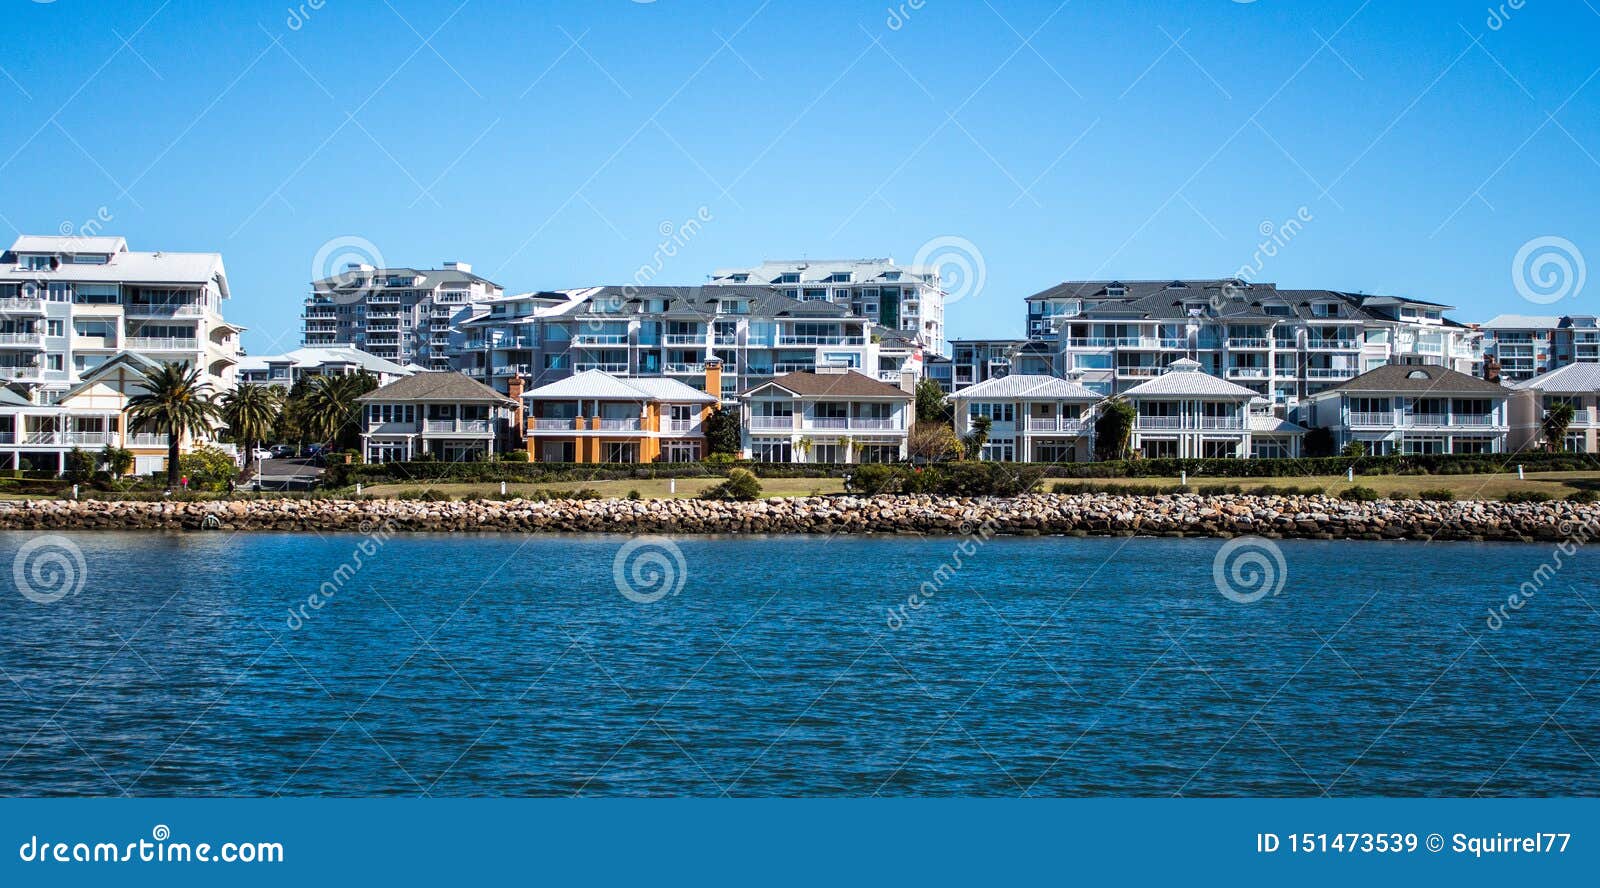 harbourside condominium apartments behind free standing houses with grass frontage, stone retaining wall and blue river against bl